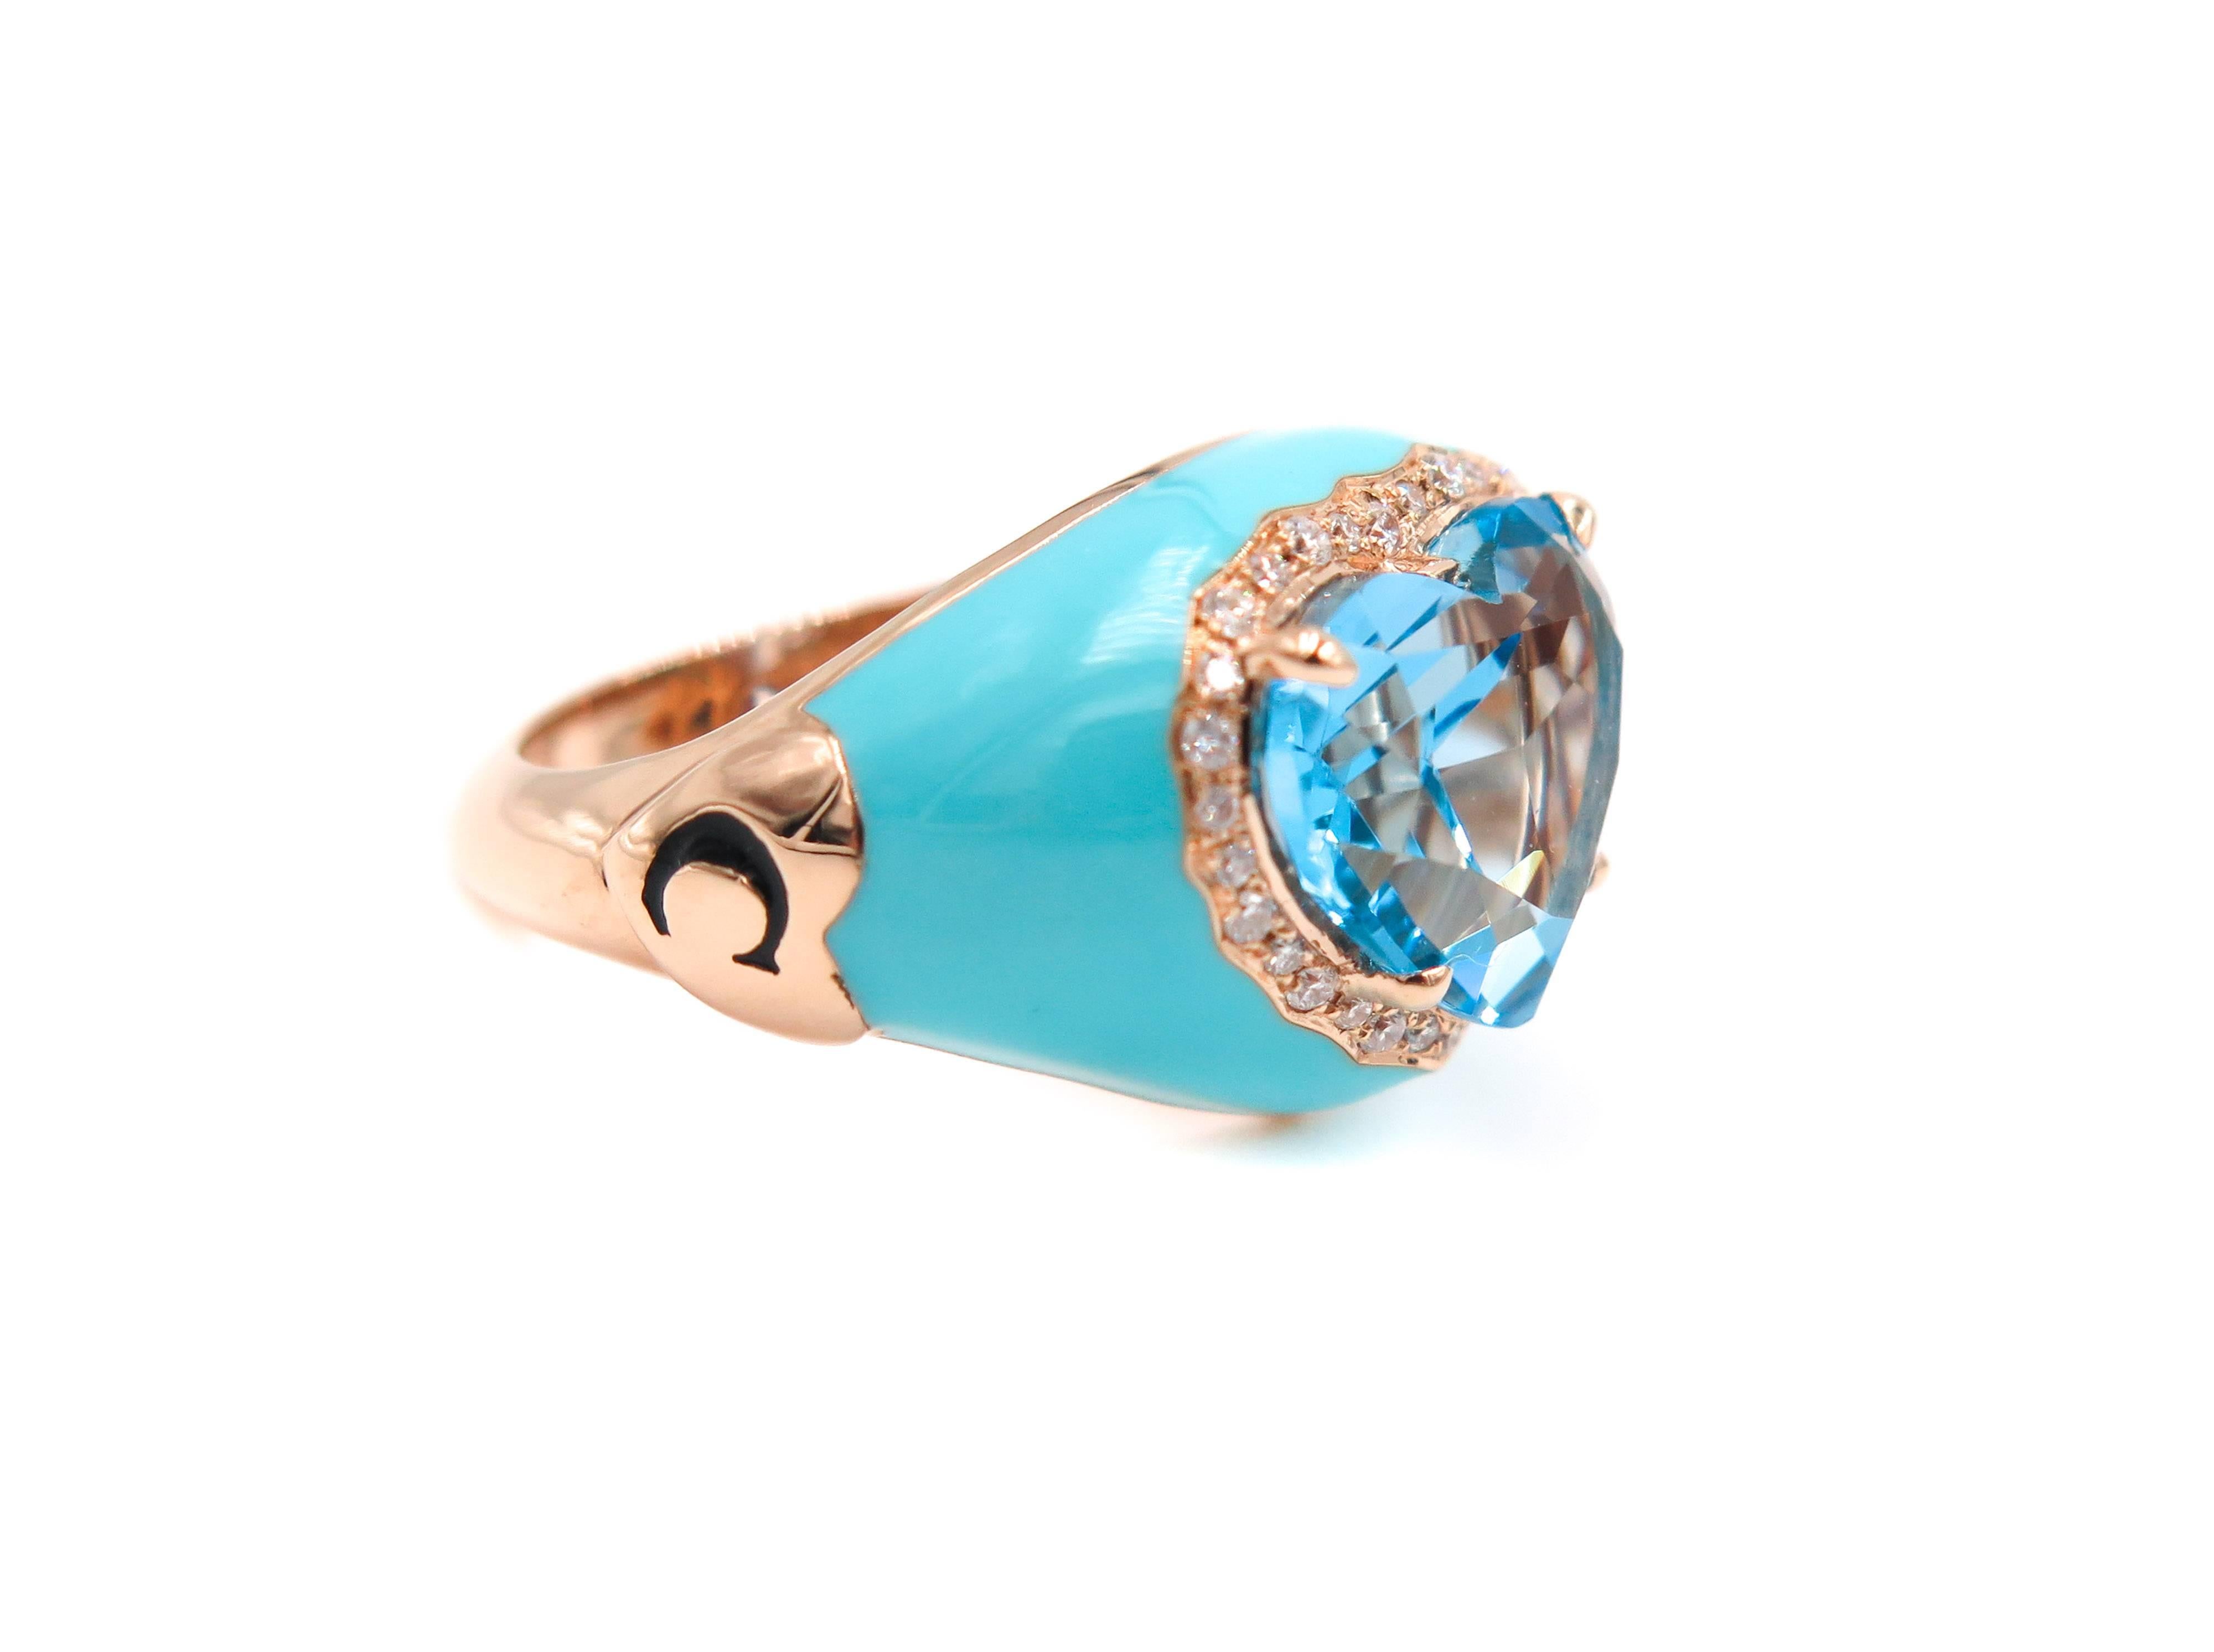 Glamour, seduction and fashion are just some of the ingredients in the mix, creating this unique ring inspired by luxury and the pursuit of beauty. 
Handcrafted in Italy by expert master jewelers in 18k rose gold and enamel. Set with a 5.50 carat